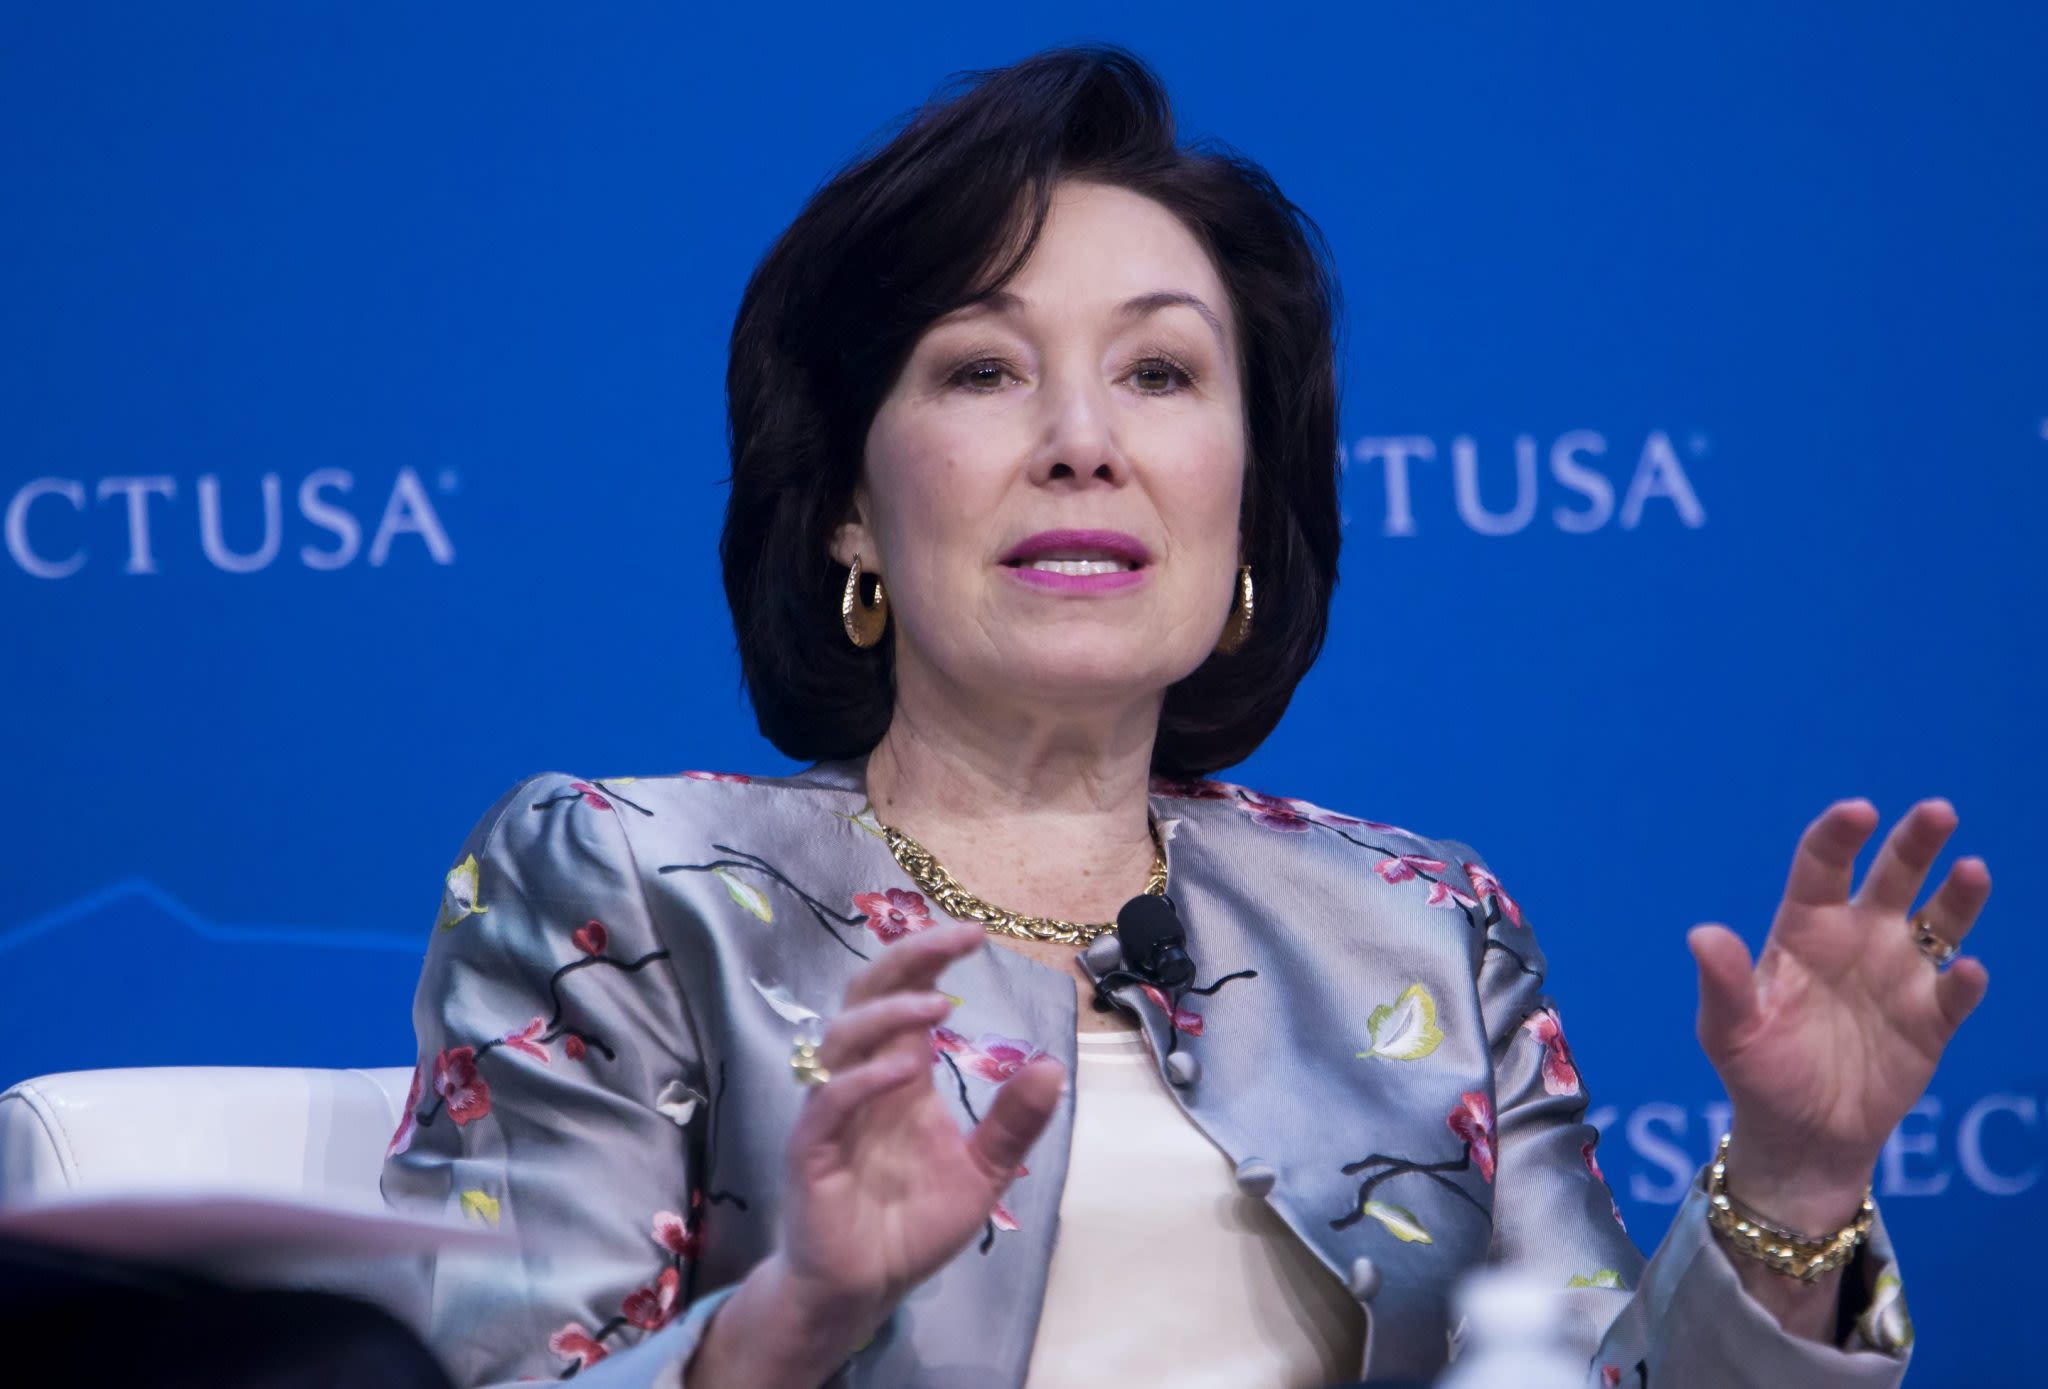 Oracle CEO Safra Catz steps down from Disney’s board after Ellisons’ big move in Hollywood